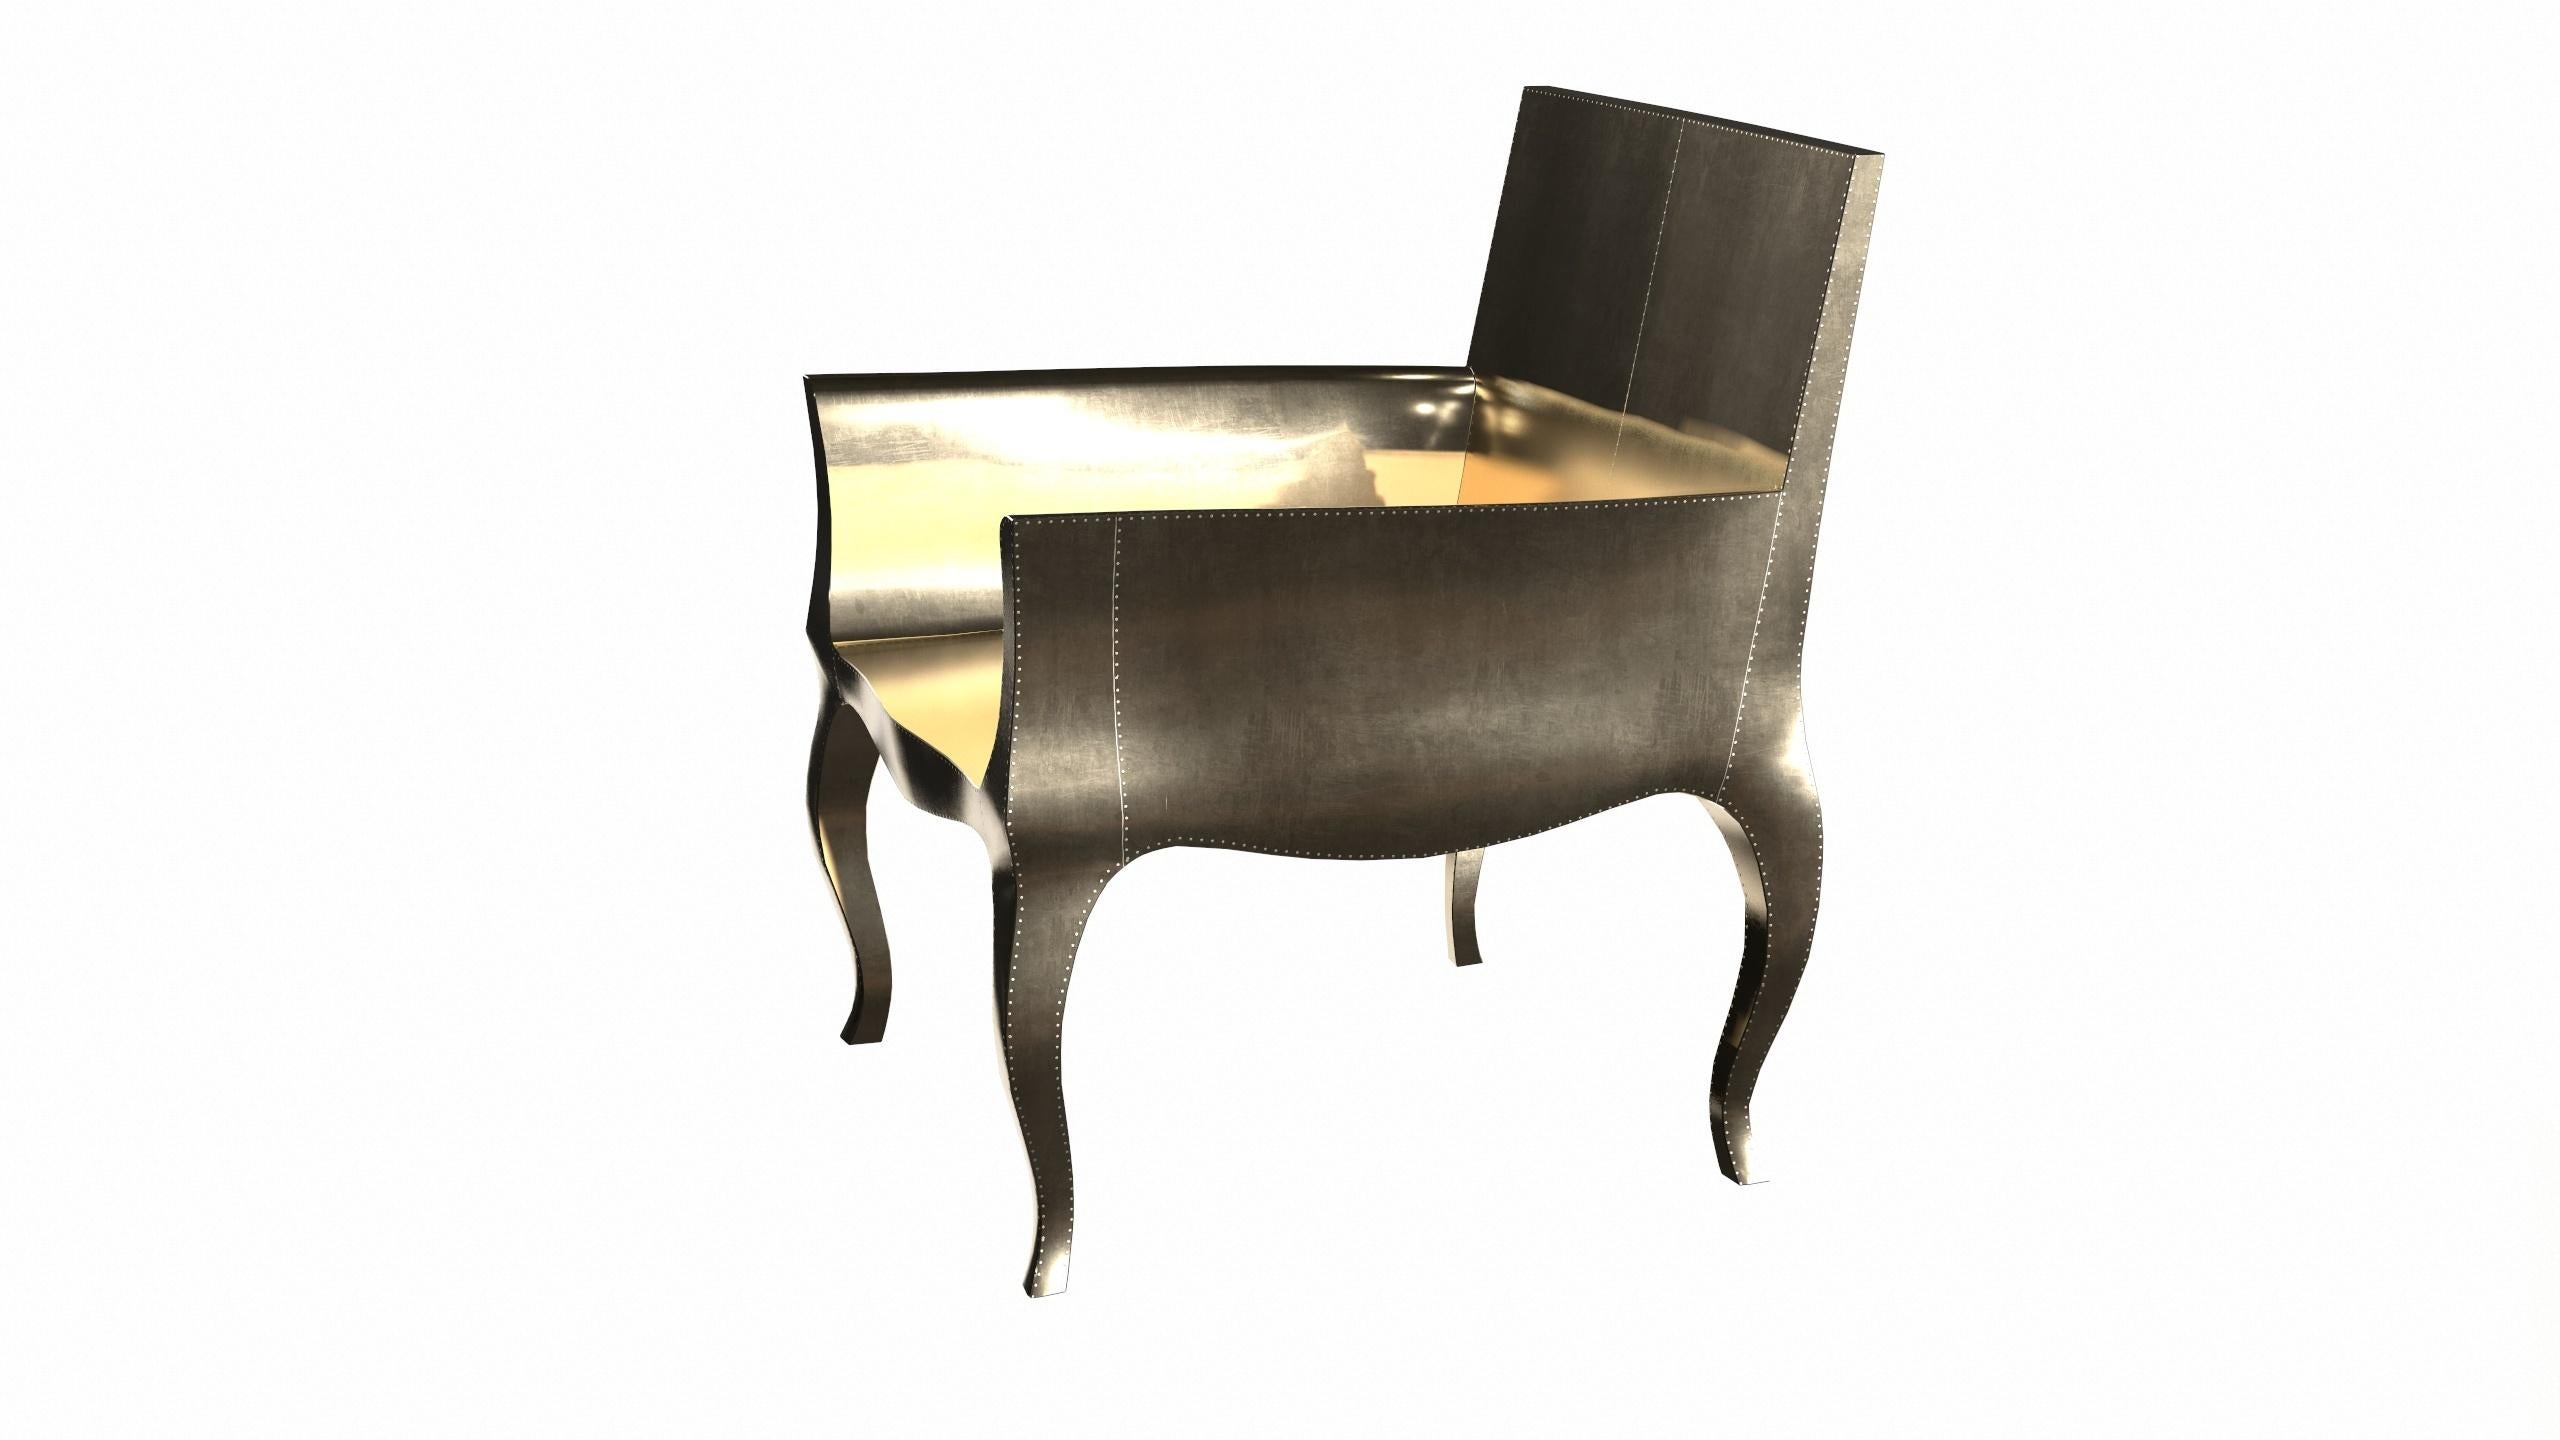 Hand-Carved Art Deco Dining Room Chairs in Smooth Brass by Paul Mathieu for S. Odegard For Sale